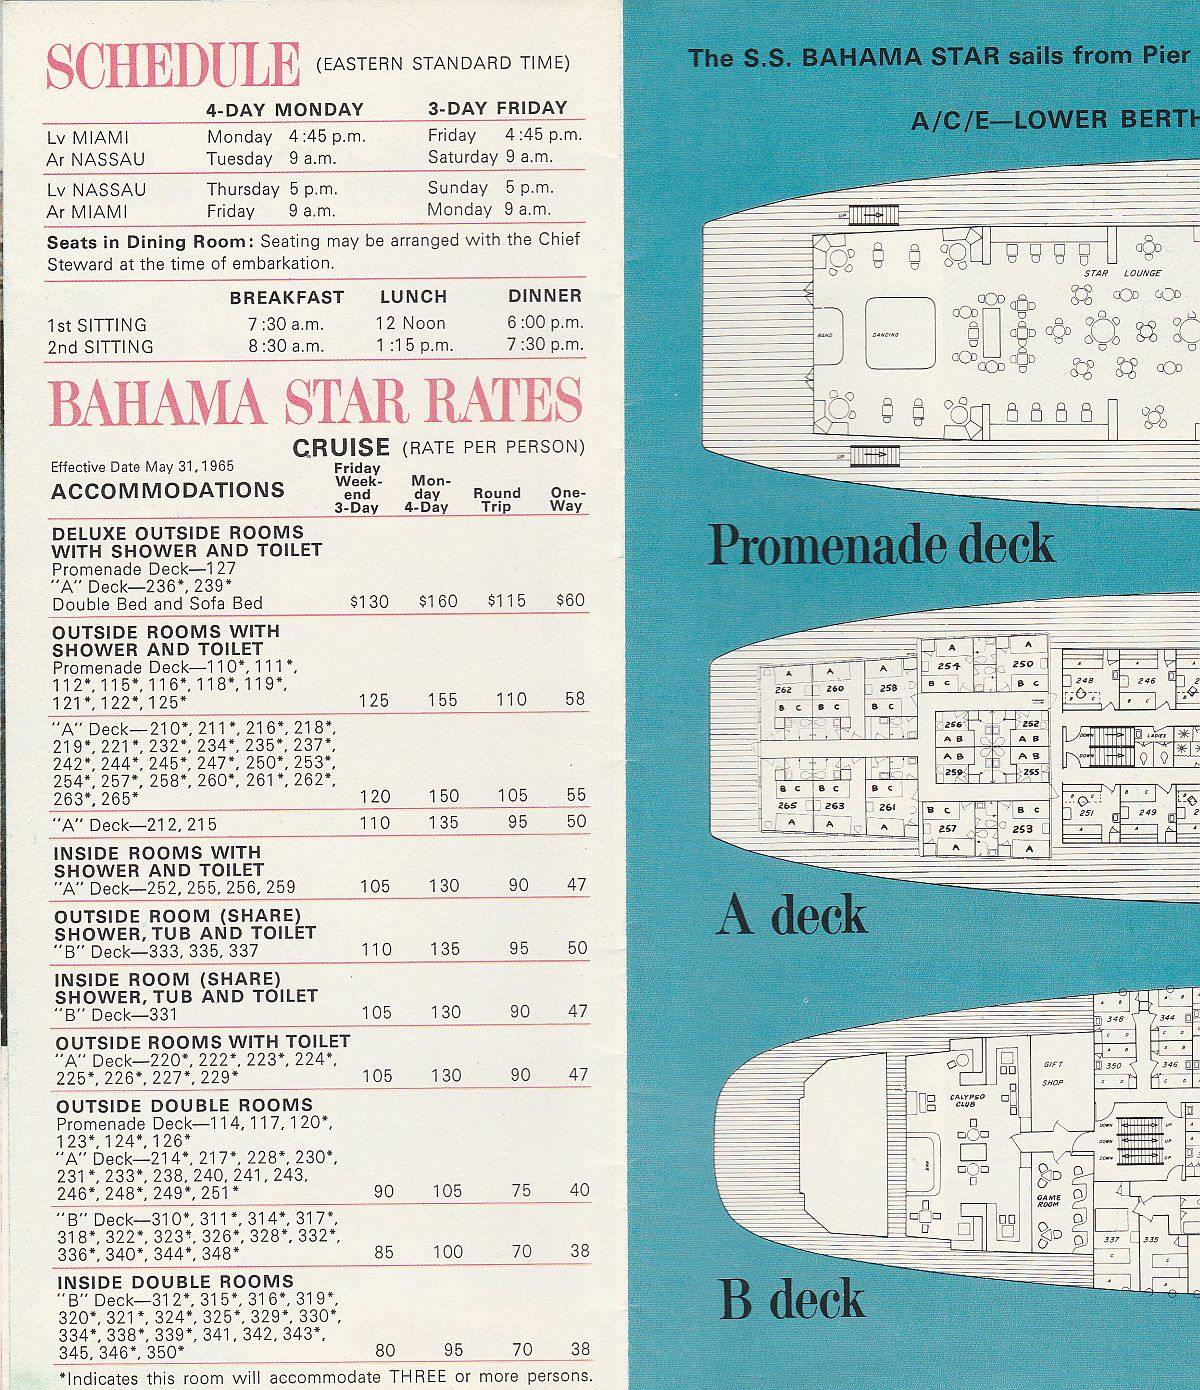 ss Bahama Star Schedule, rates and deck plans: Sailing and dining schedules, cruise fares and left page of deck plan